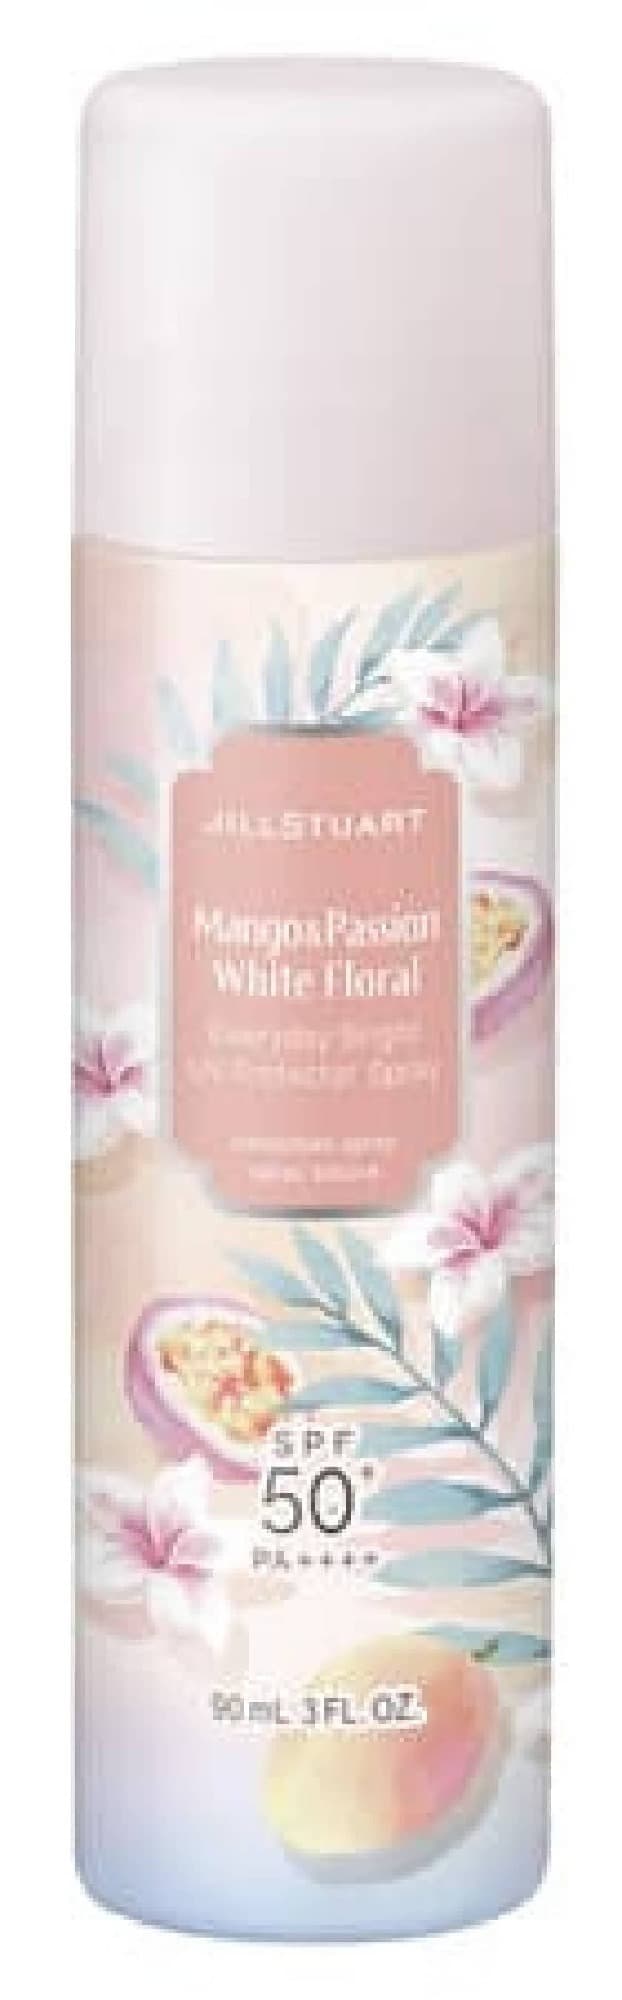 Jill Stuart "Icy Head Shower Mango & Passion White Floral" summer only! Mist lotion and sunscreen spray also available